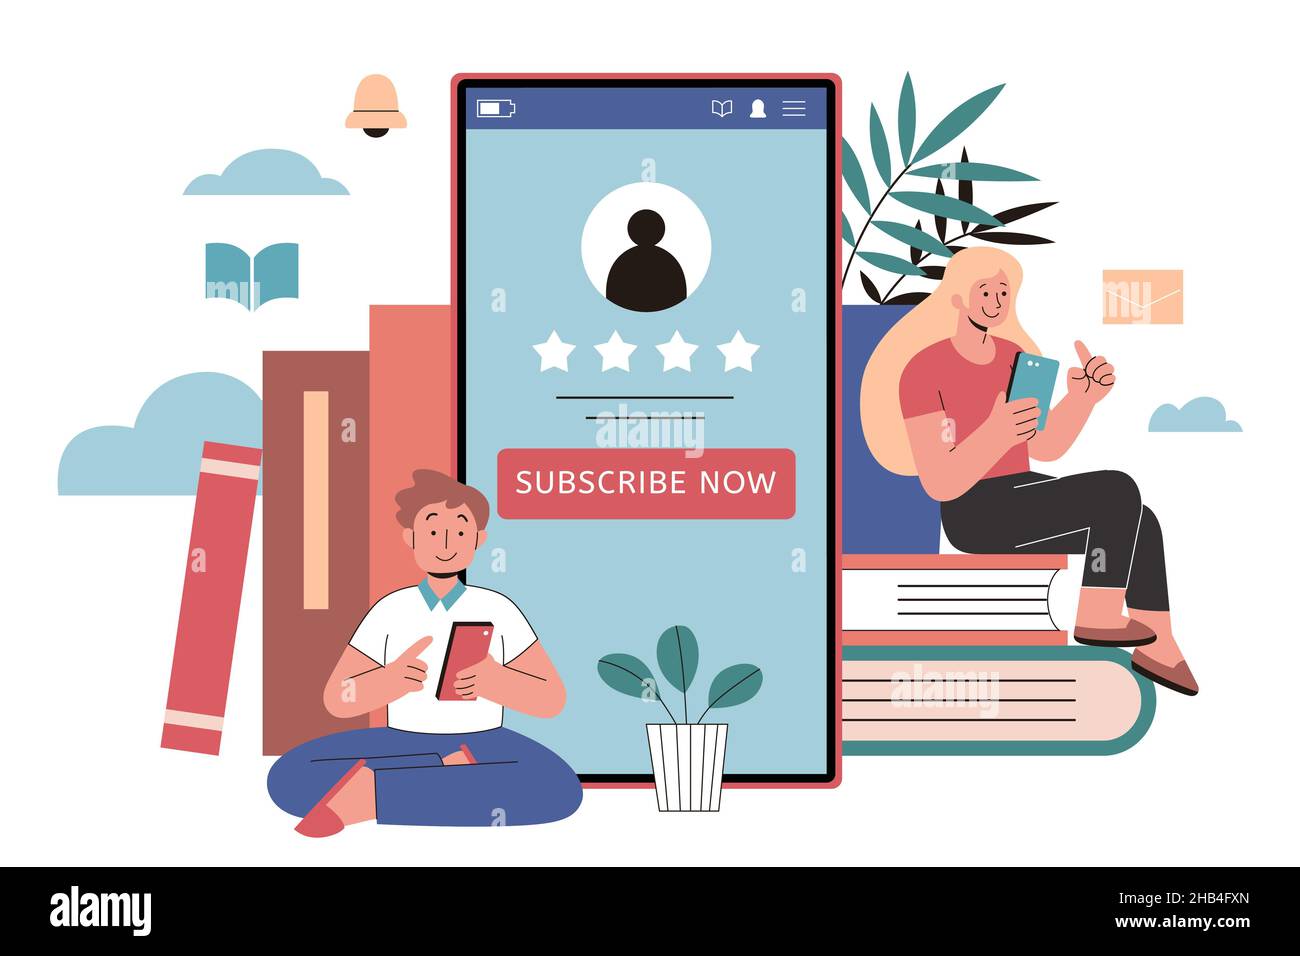 Educational content subscription in flat style illustration. Boy and girl using mobile phones while sitting by books, and subscription CTA to shown to Stock Vector